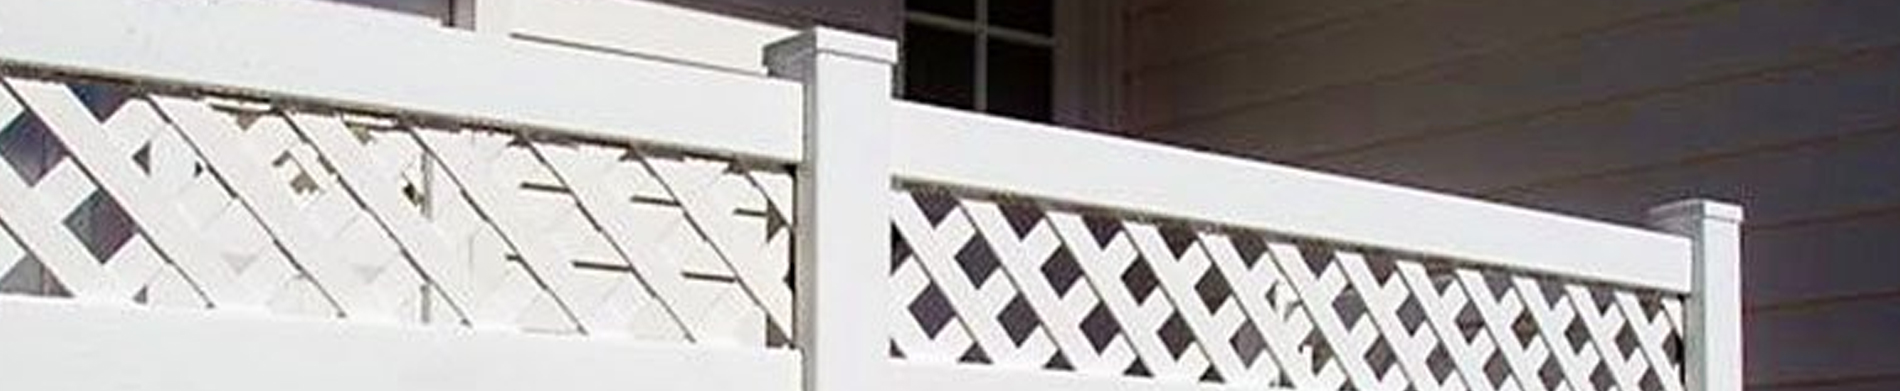 How to buy Vinyl Fencing—expert insight into buying vinyl fences the RIGHT way through industry expert Viken Ohanesian, CEO of Duramax